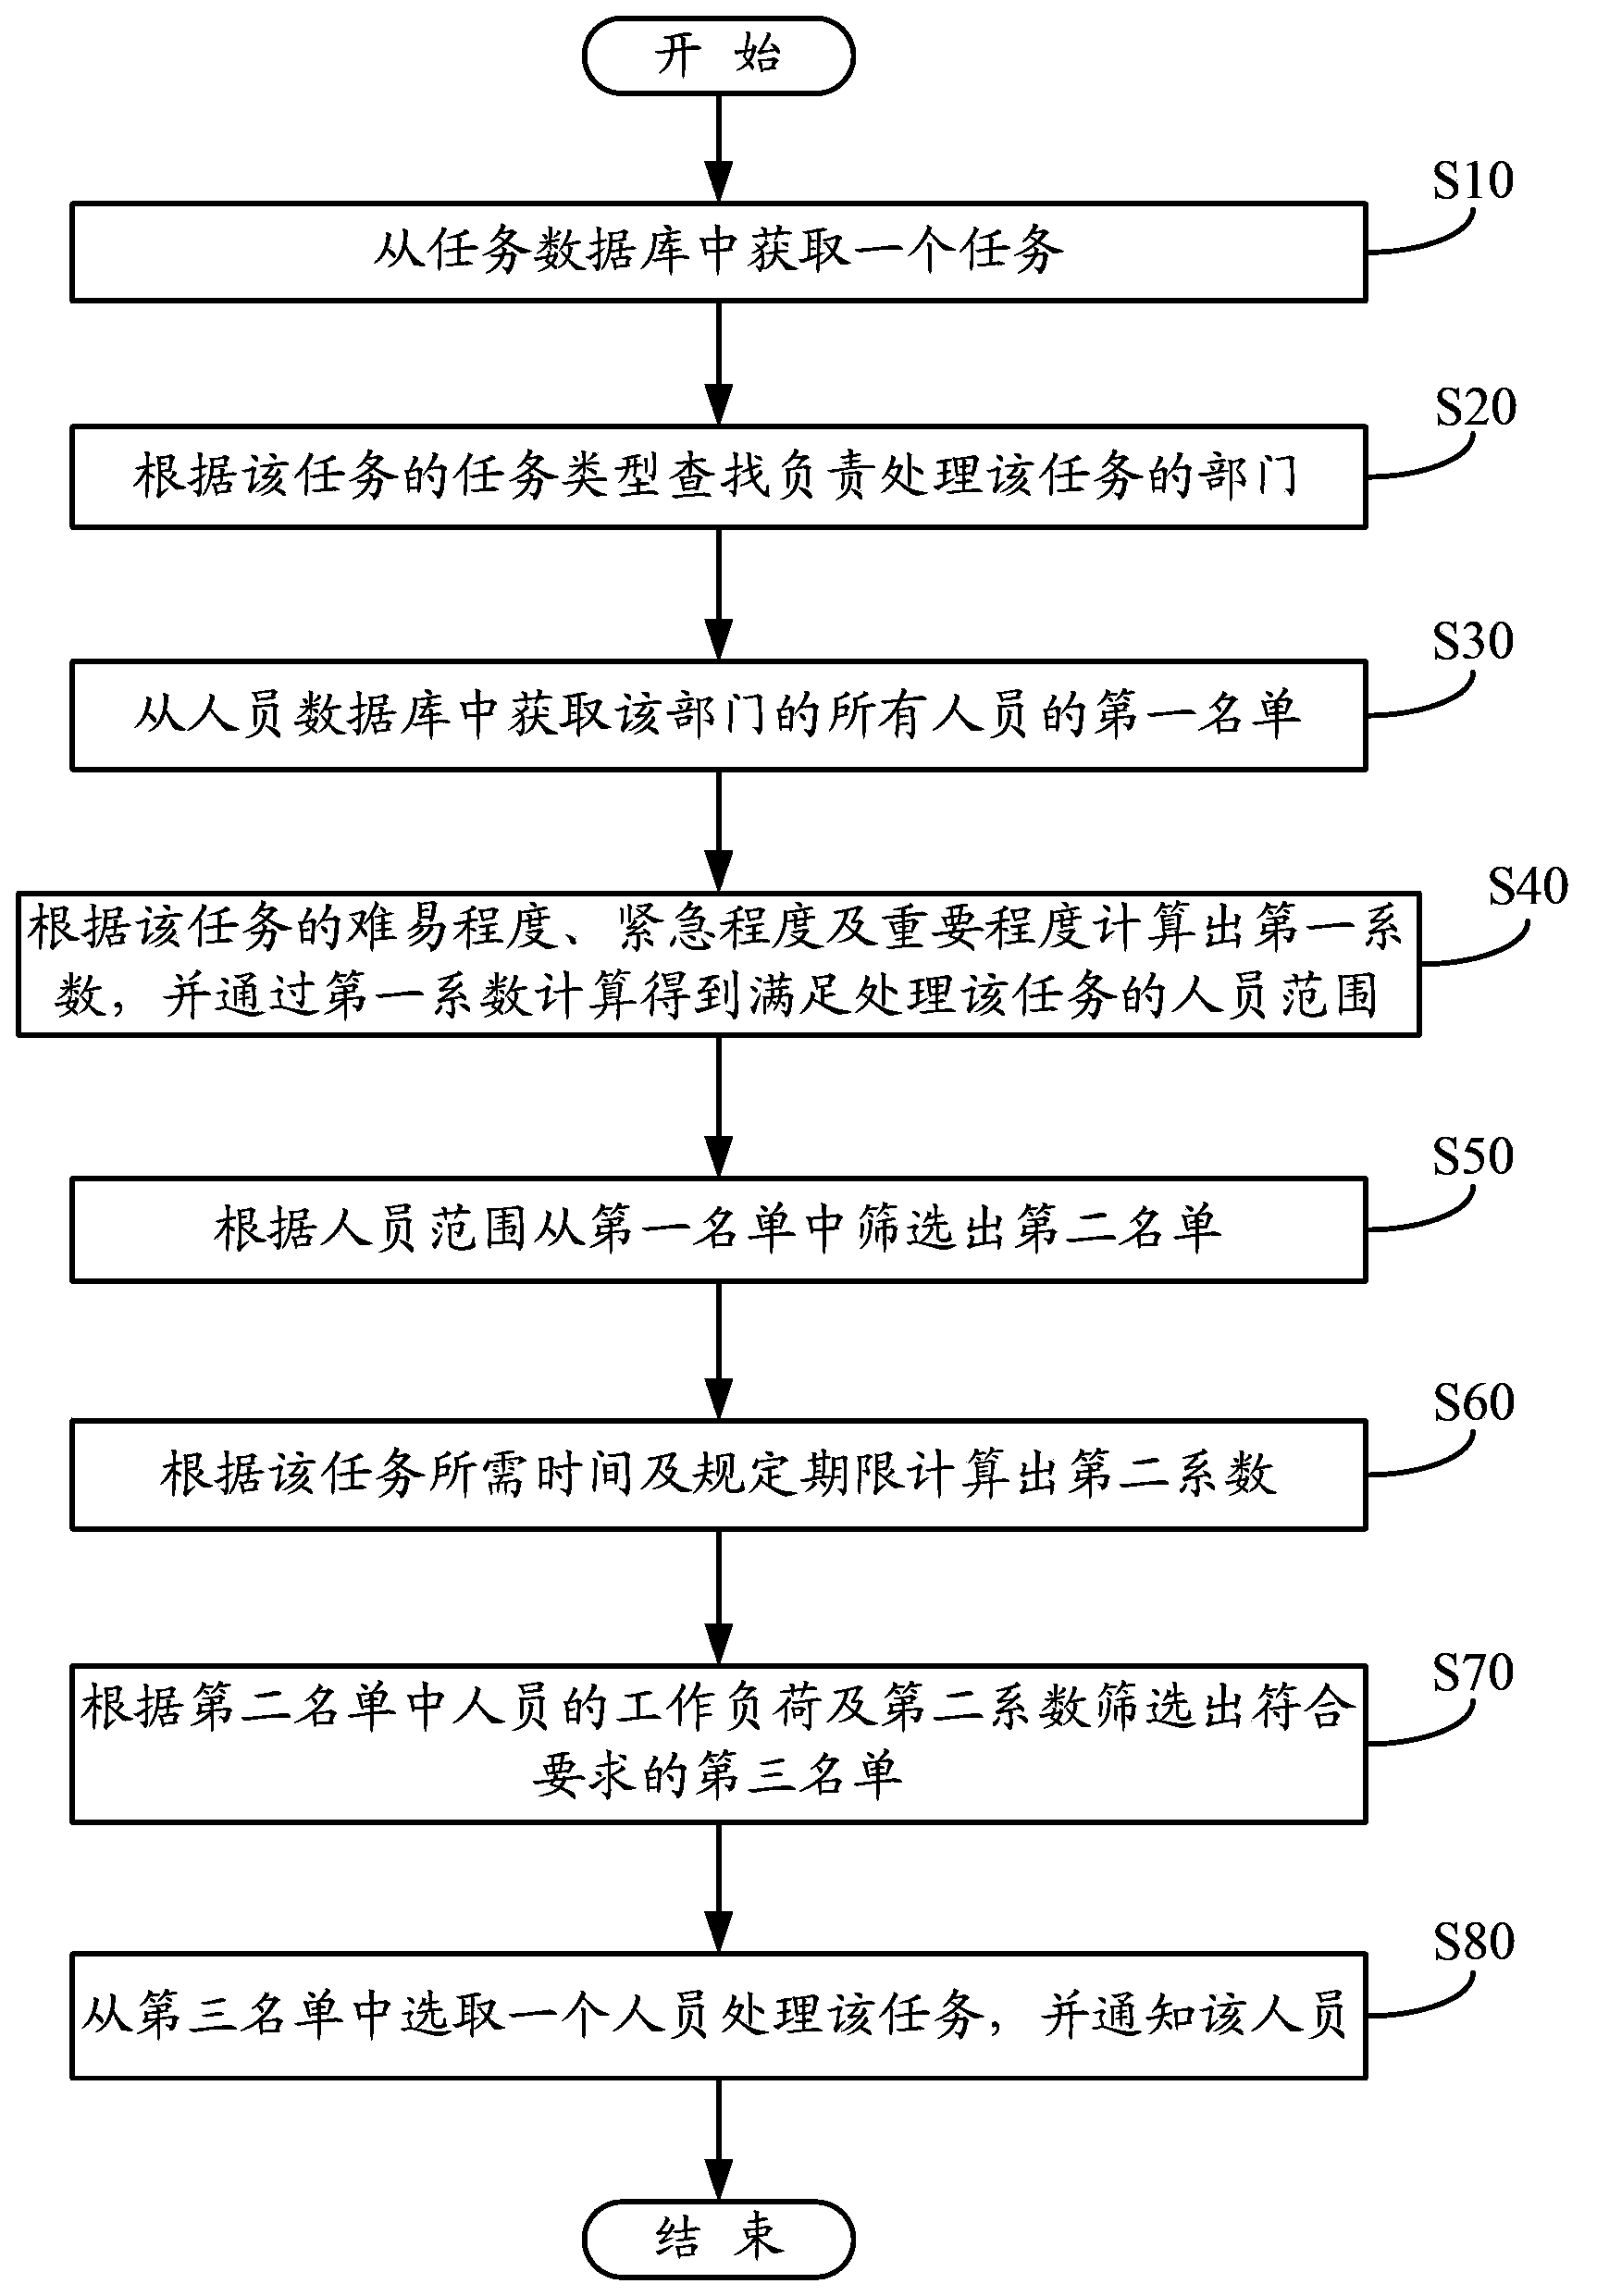 Task allocation management system and method